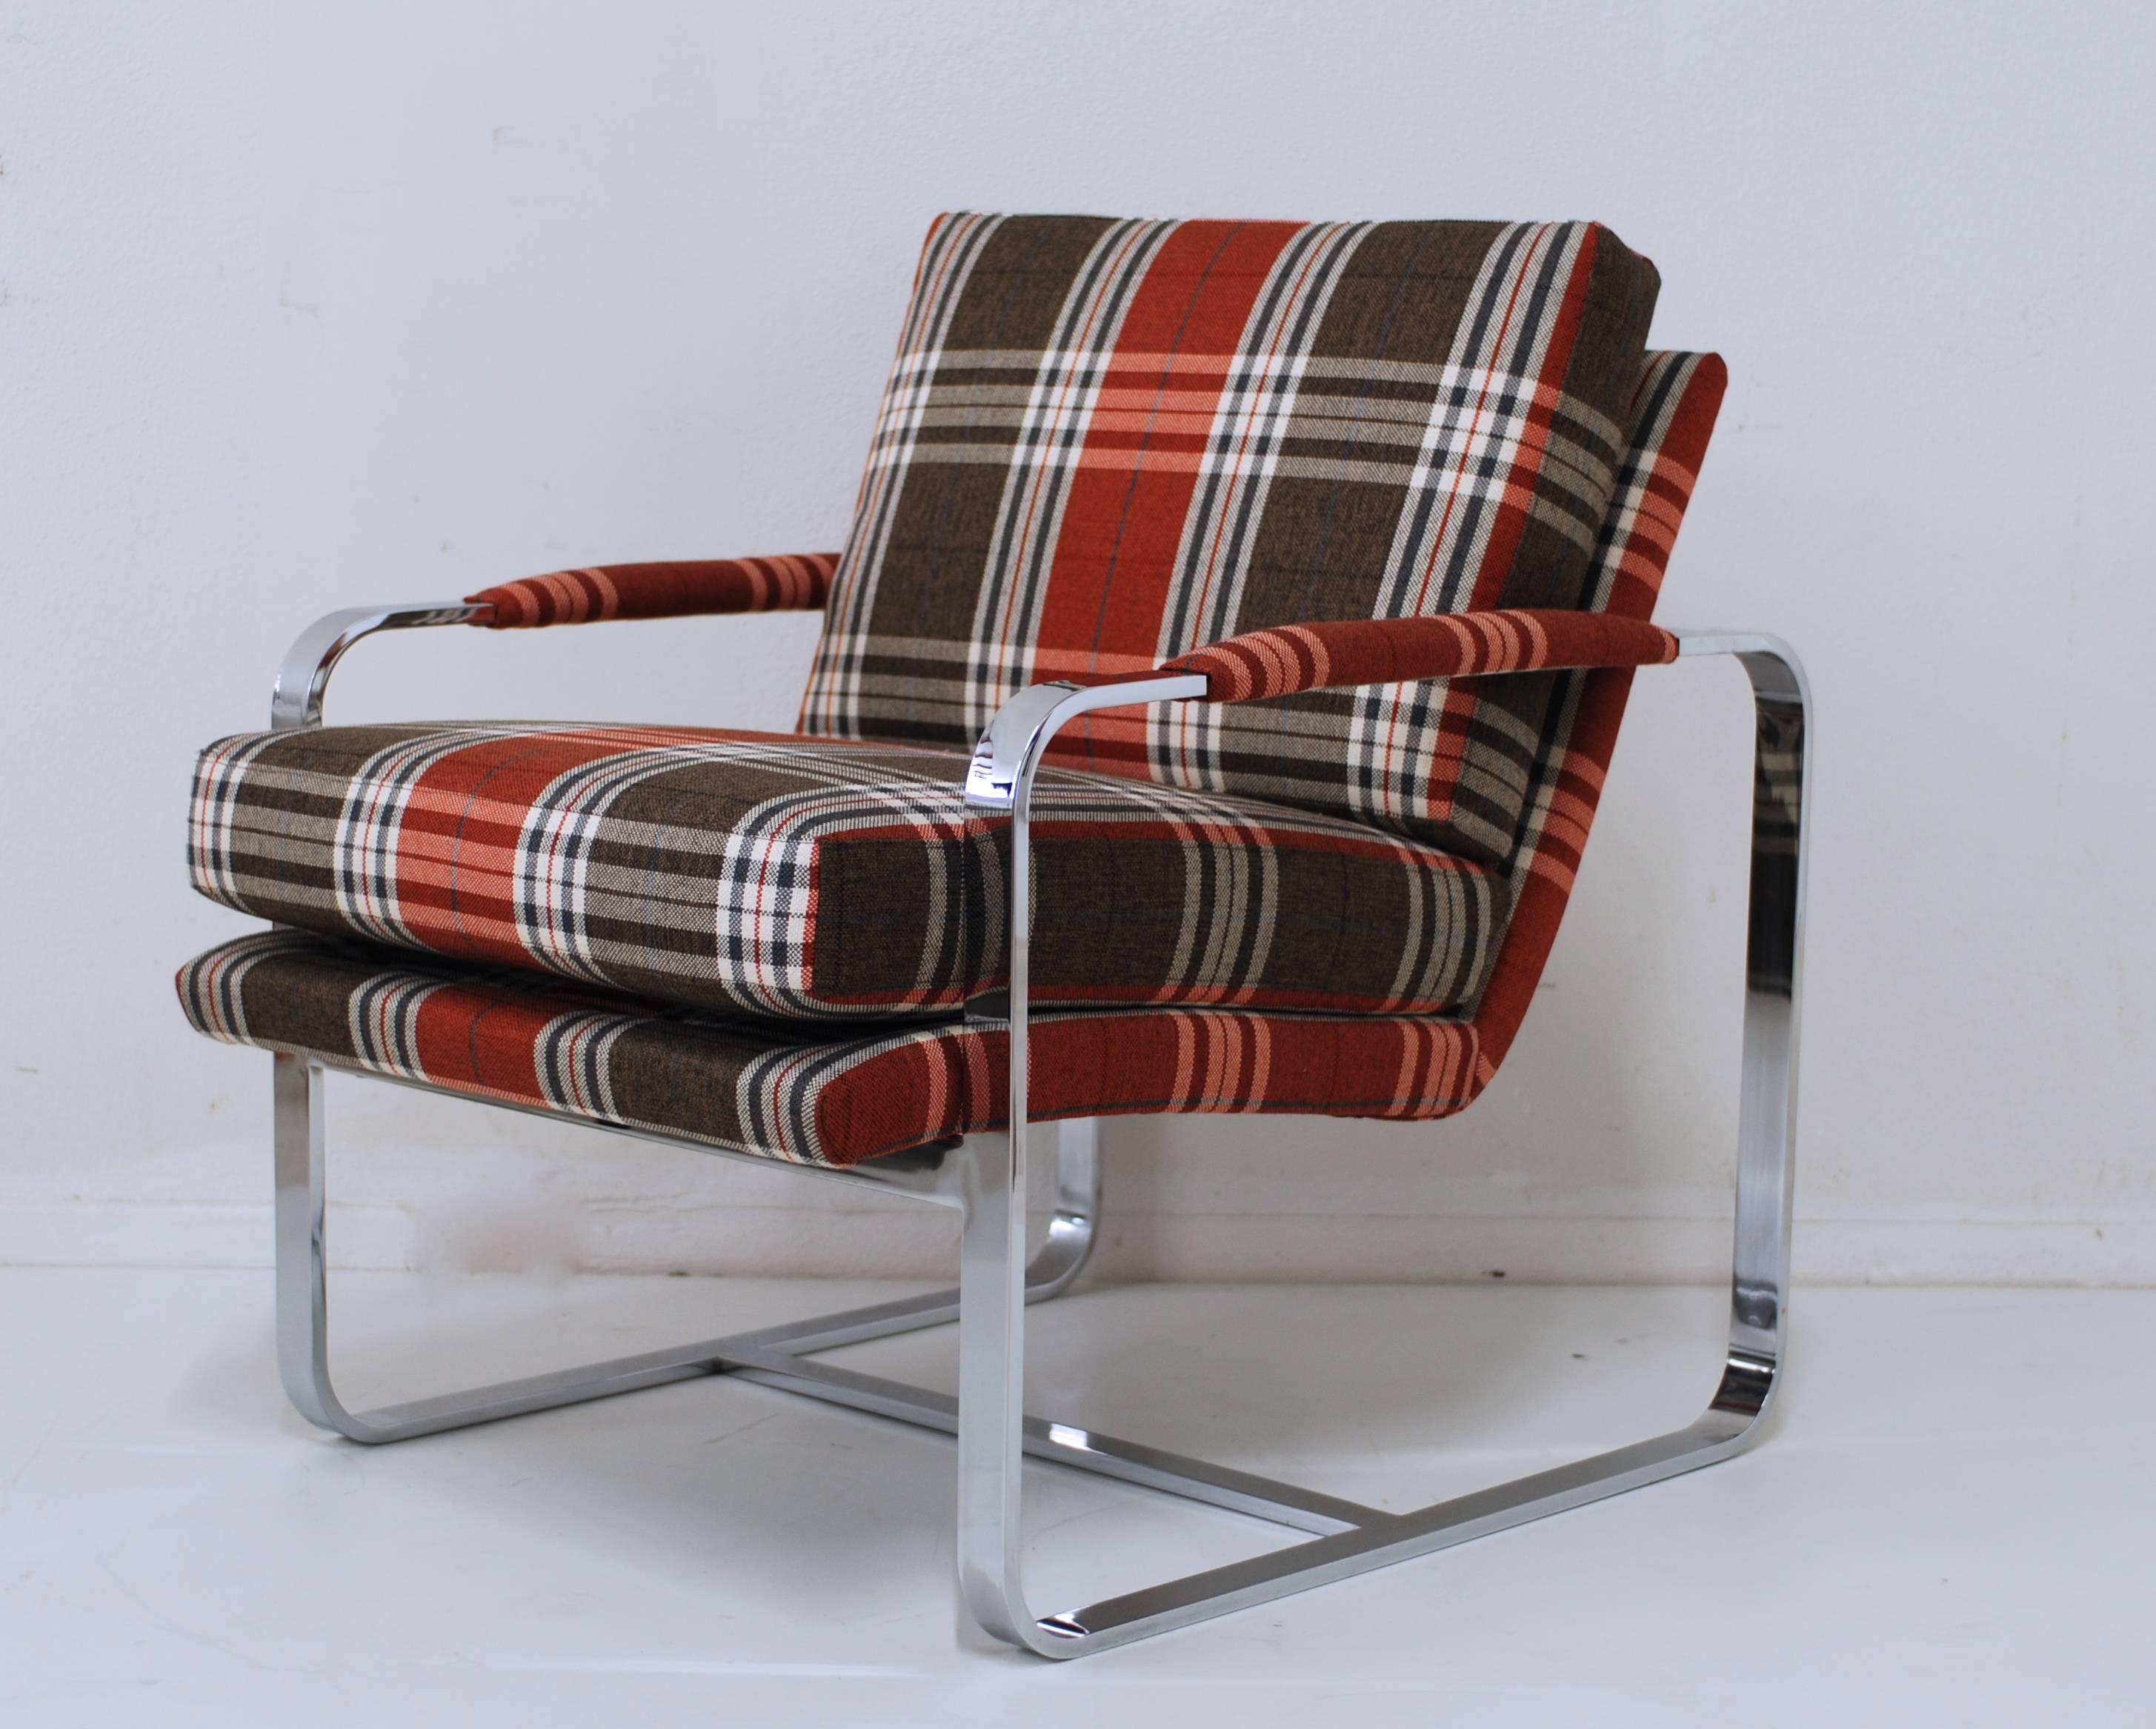 For Alexander McQueen tartan was an important fabric, it symbolized his Scottish heritage and it was a theme throughout his collections. This chrome lounge chair in the manner of Milo Baughman has been reupholstered and recovered with a fresh tartan